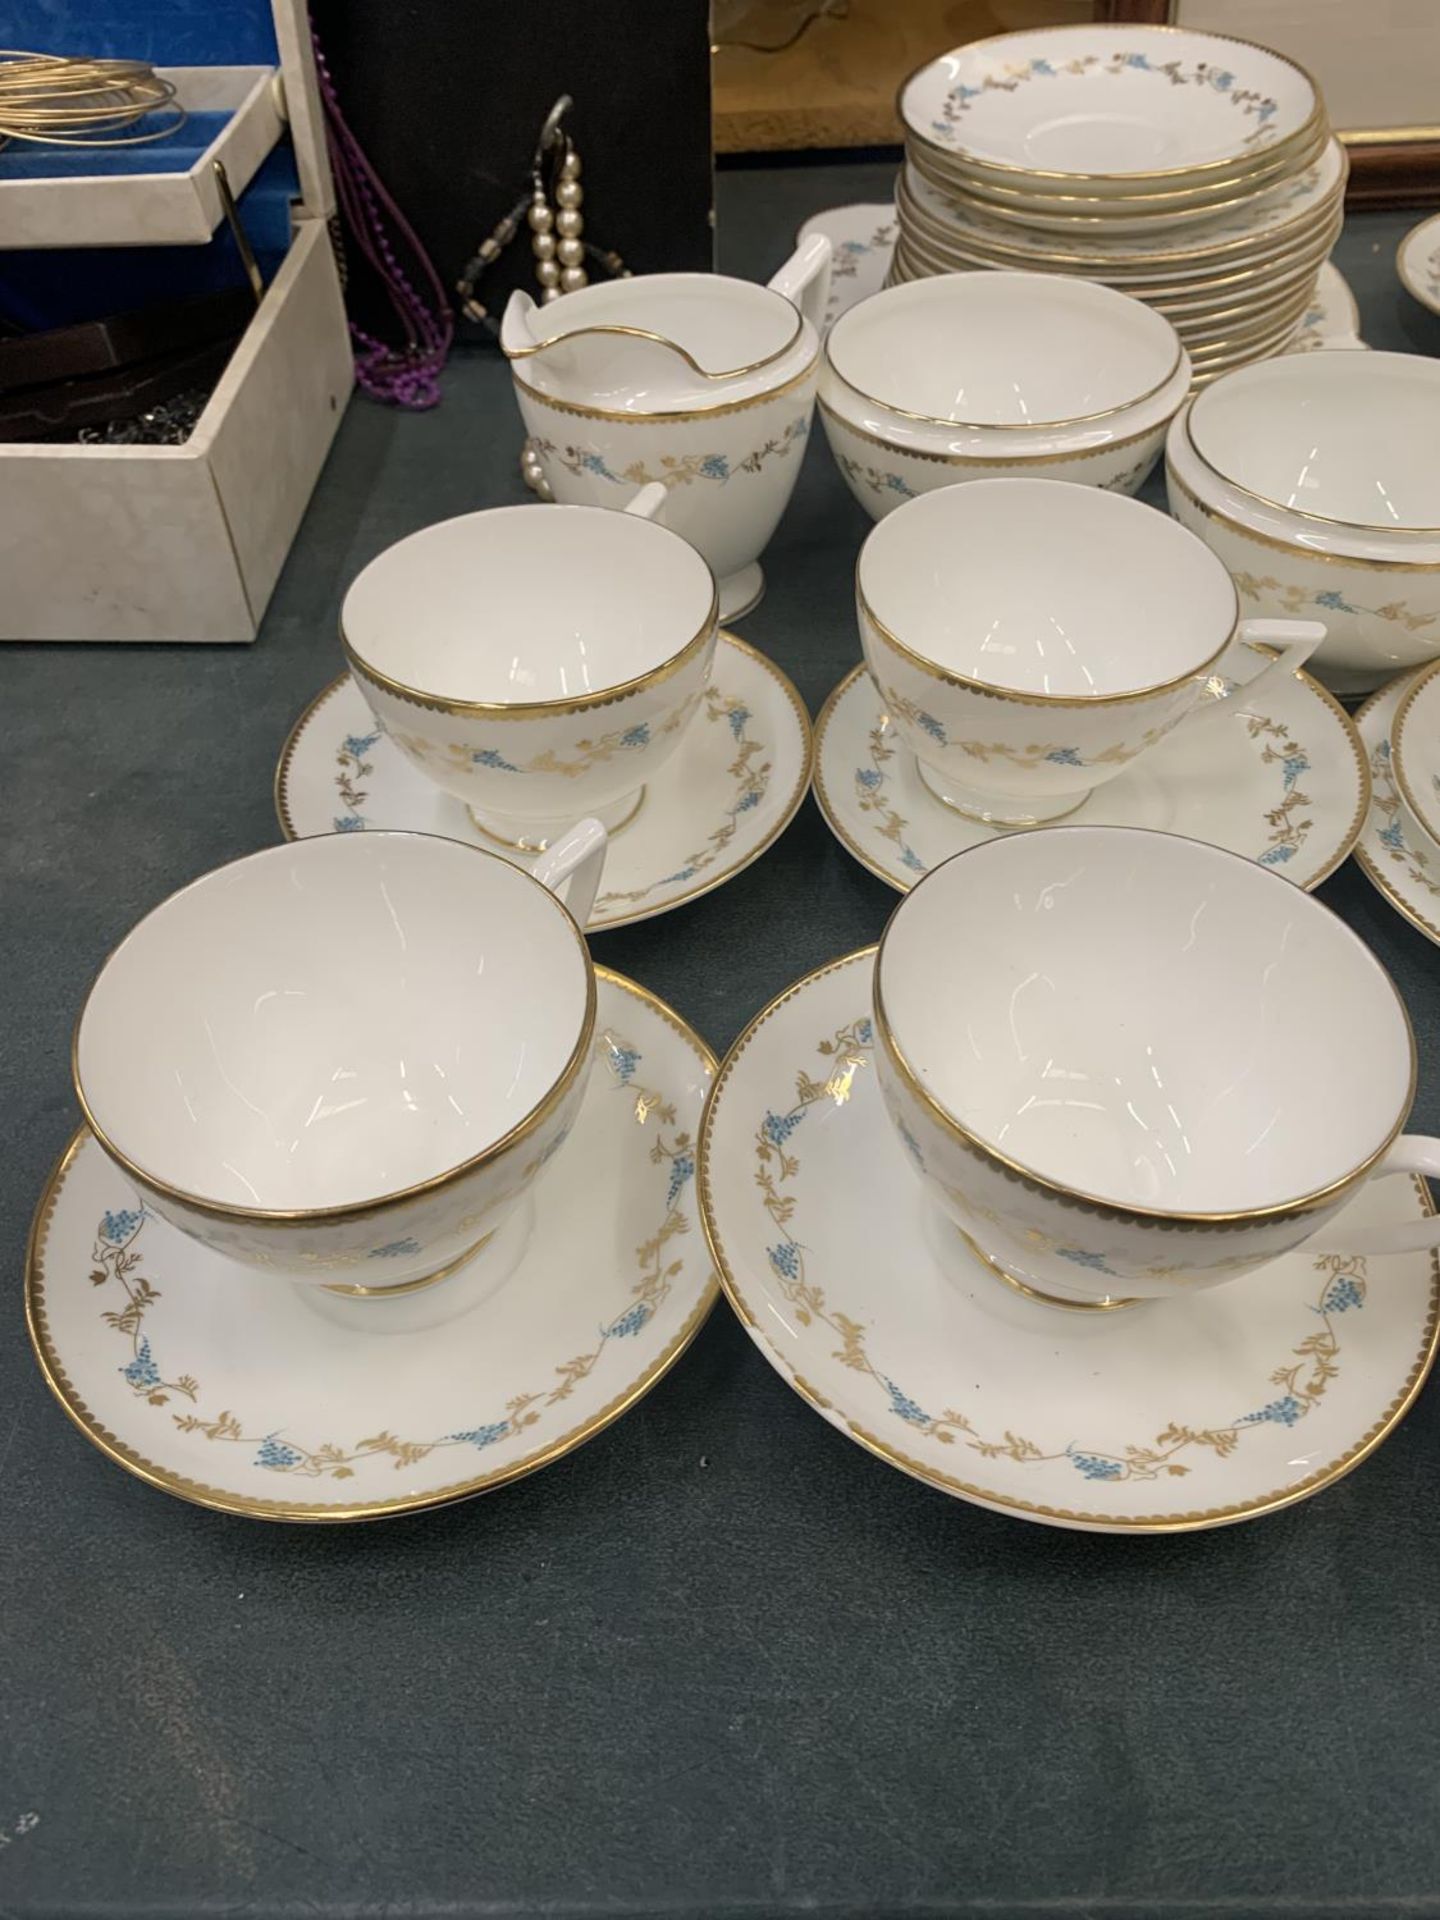 A MINTON 'CHAMPAGNE' TEASET TO INCLUDE A CAKE PLATE, CUPS, SAUCERS, SIDE PLATES, TWO CREAM JUGS - Image 2 of 4